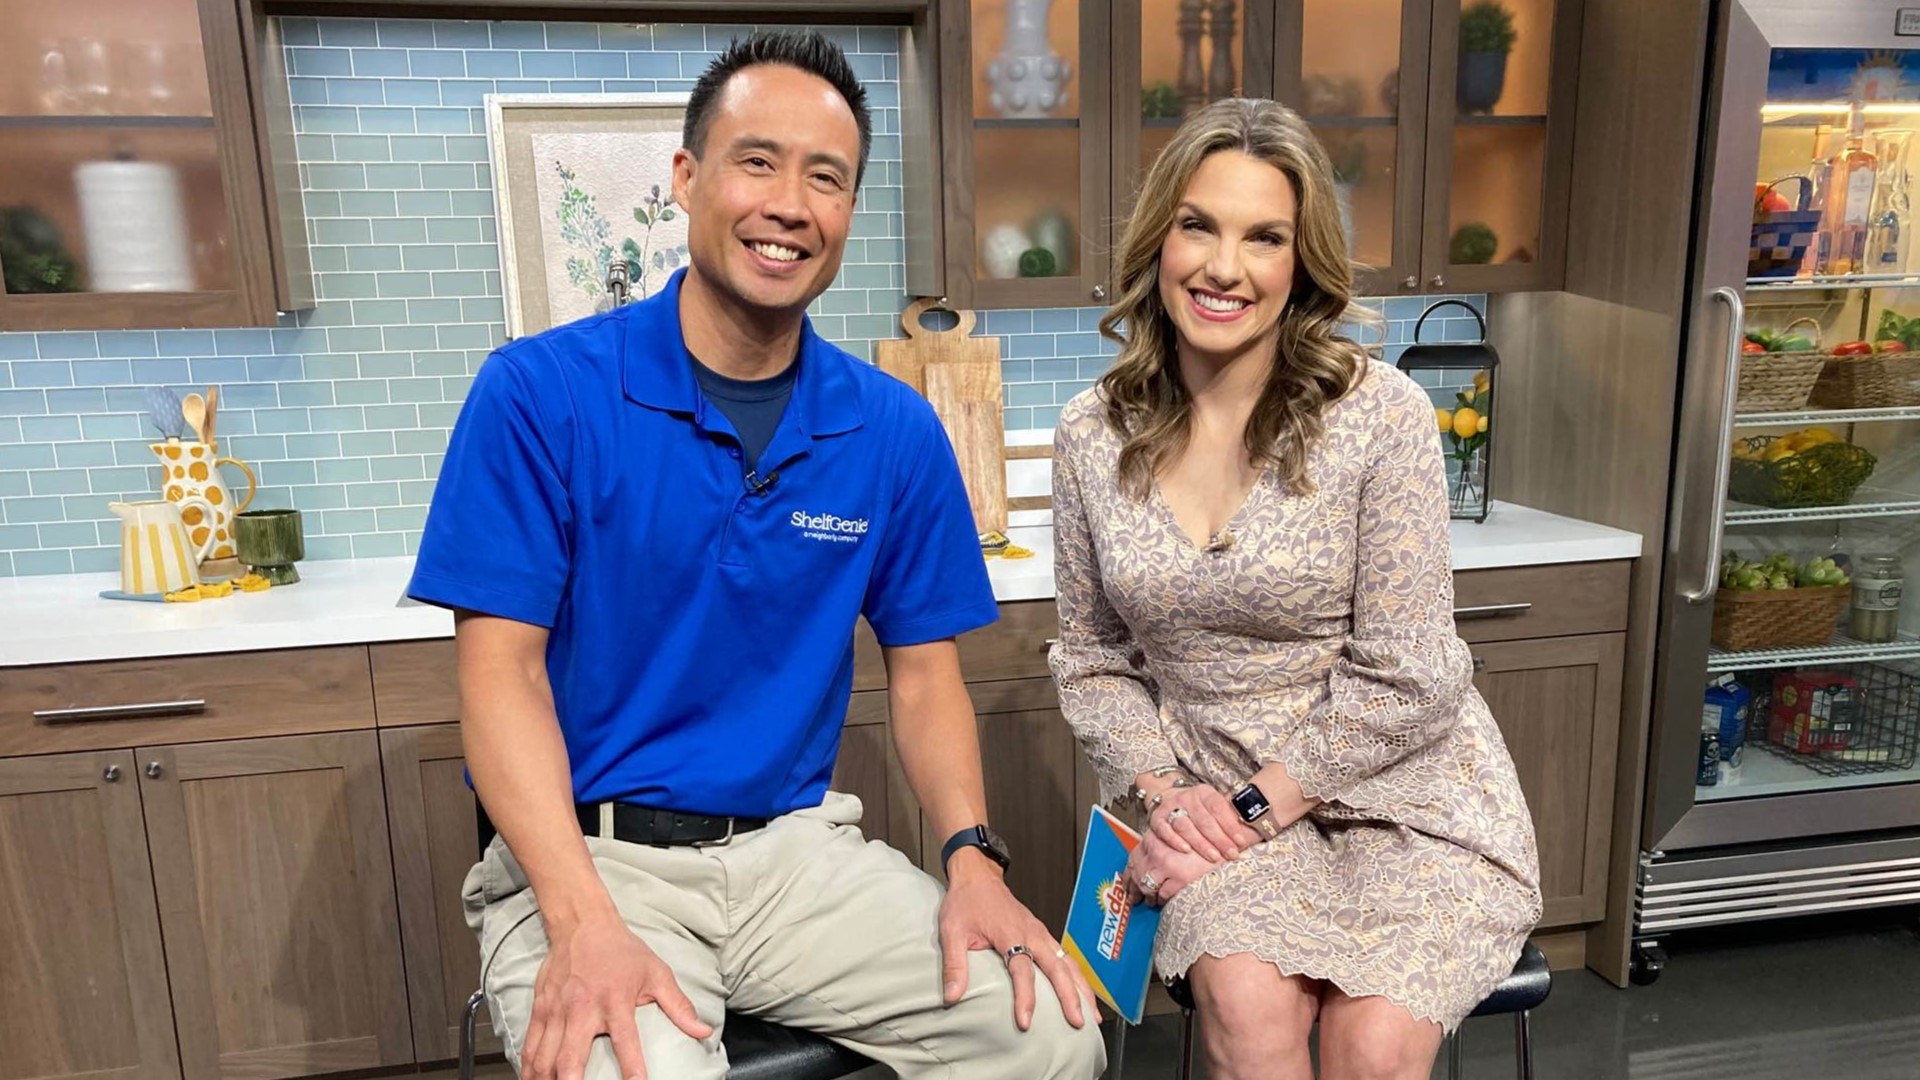 Alan Regala from ShelfGenie of Seattle shares some smart storage solutions to tackle spring cleaning. Sponsored by ShelfGenie.